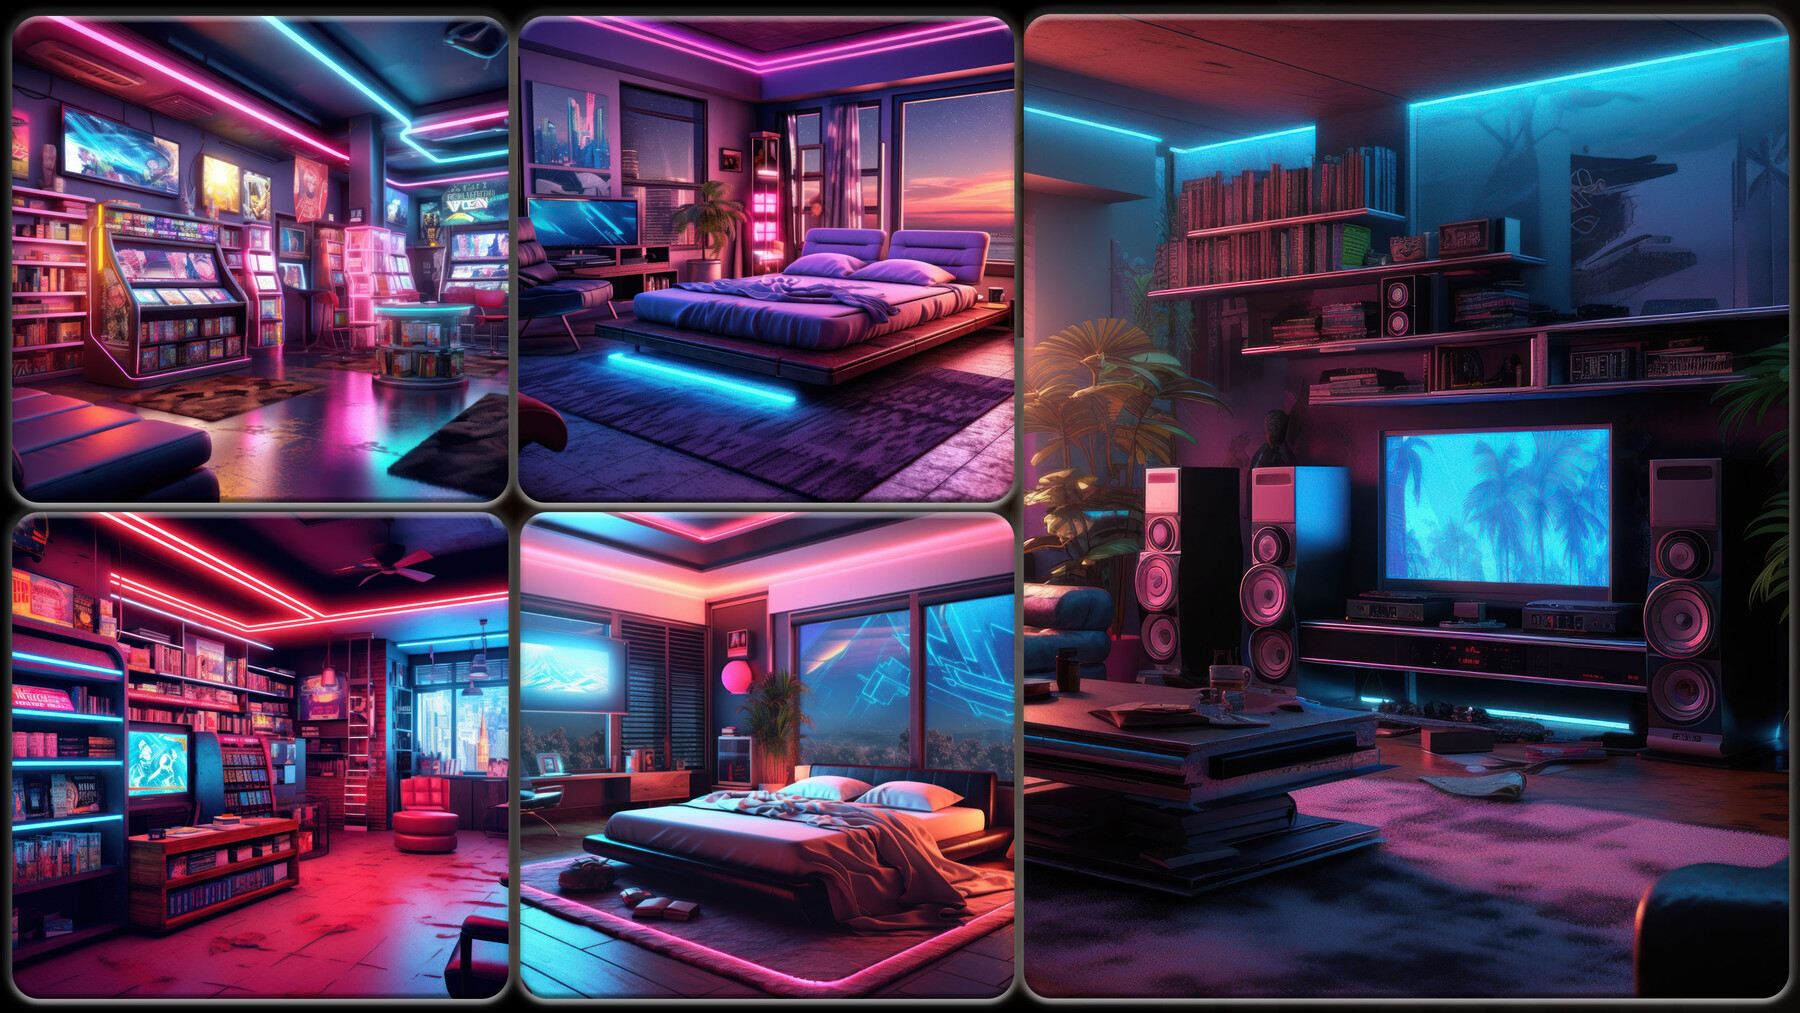 ArtStation - 230 Synthwave Environment - Interior Reference Pack | 4K ...